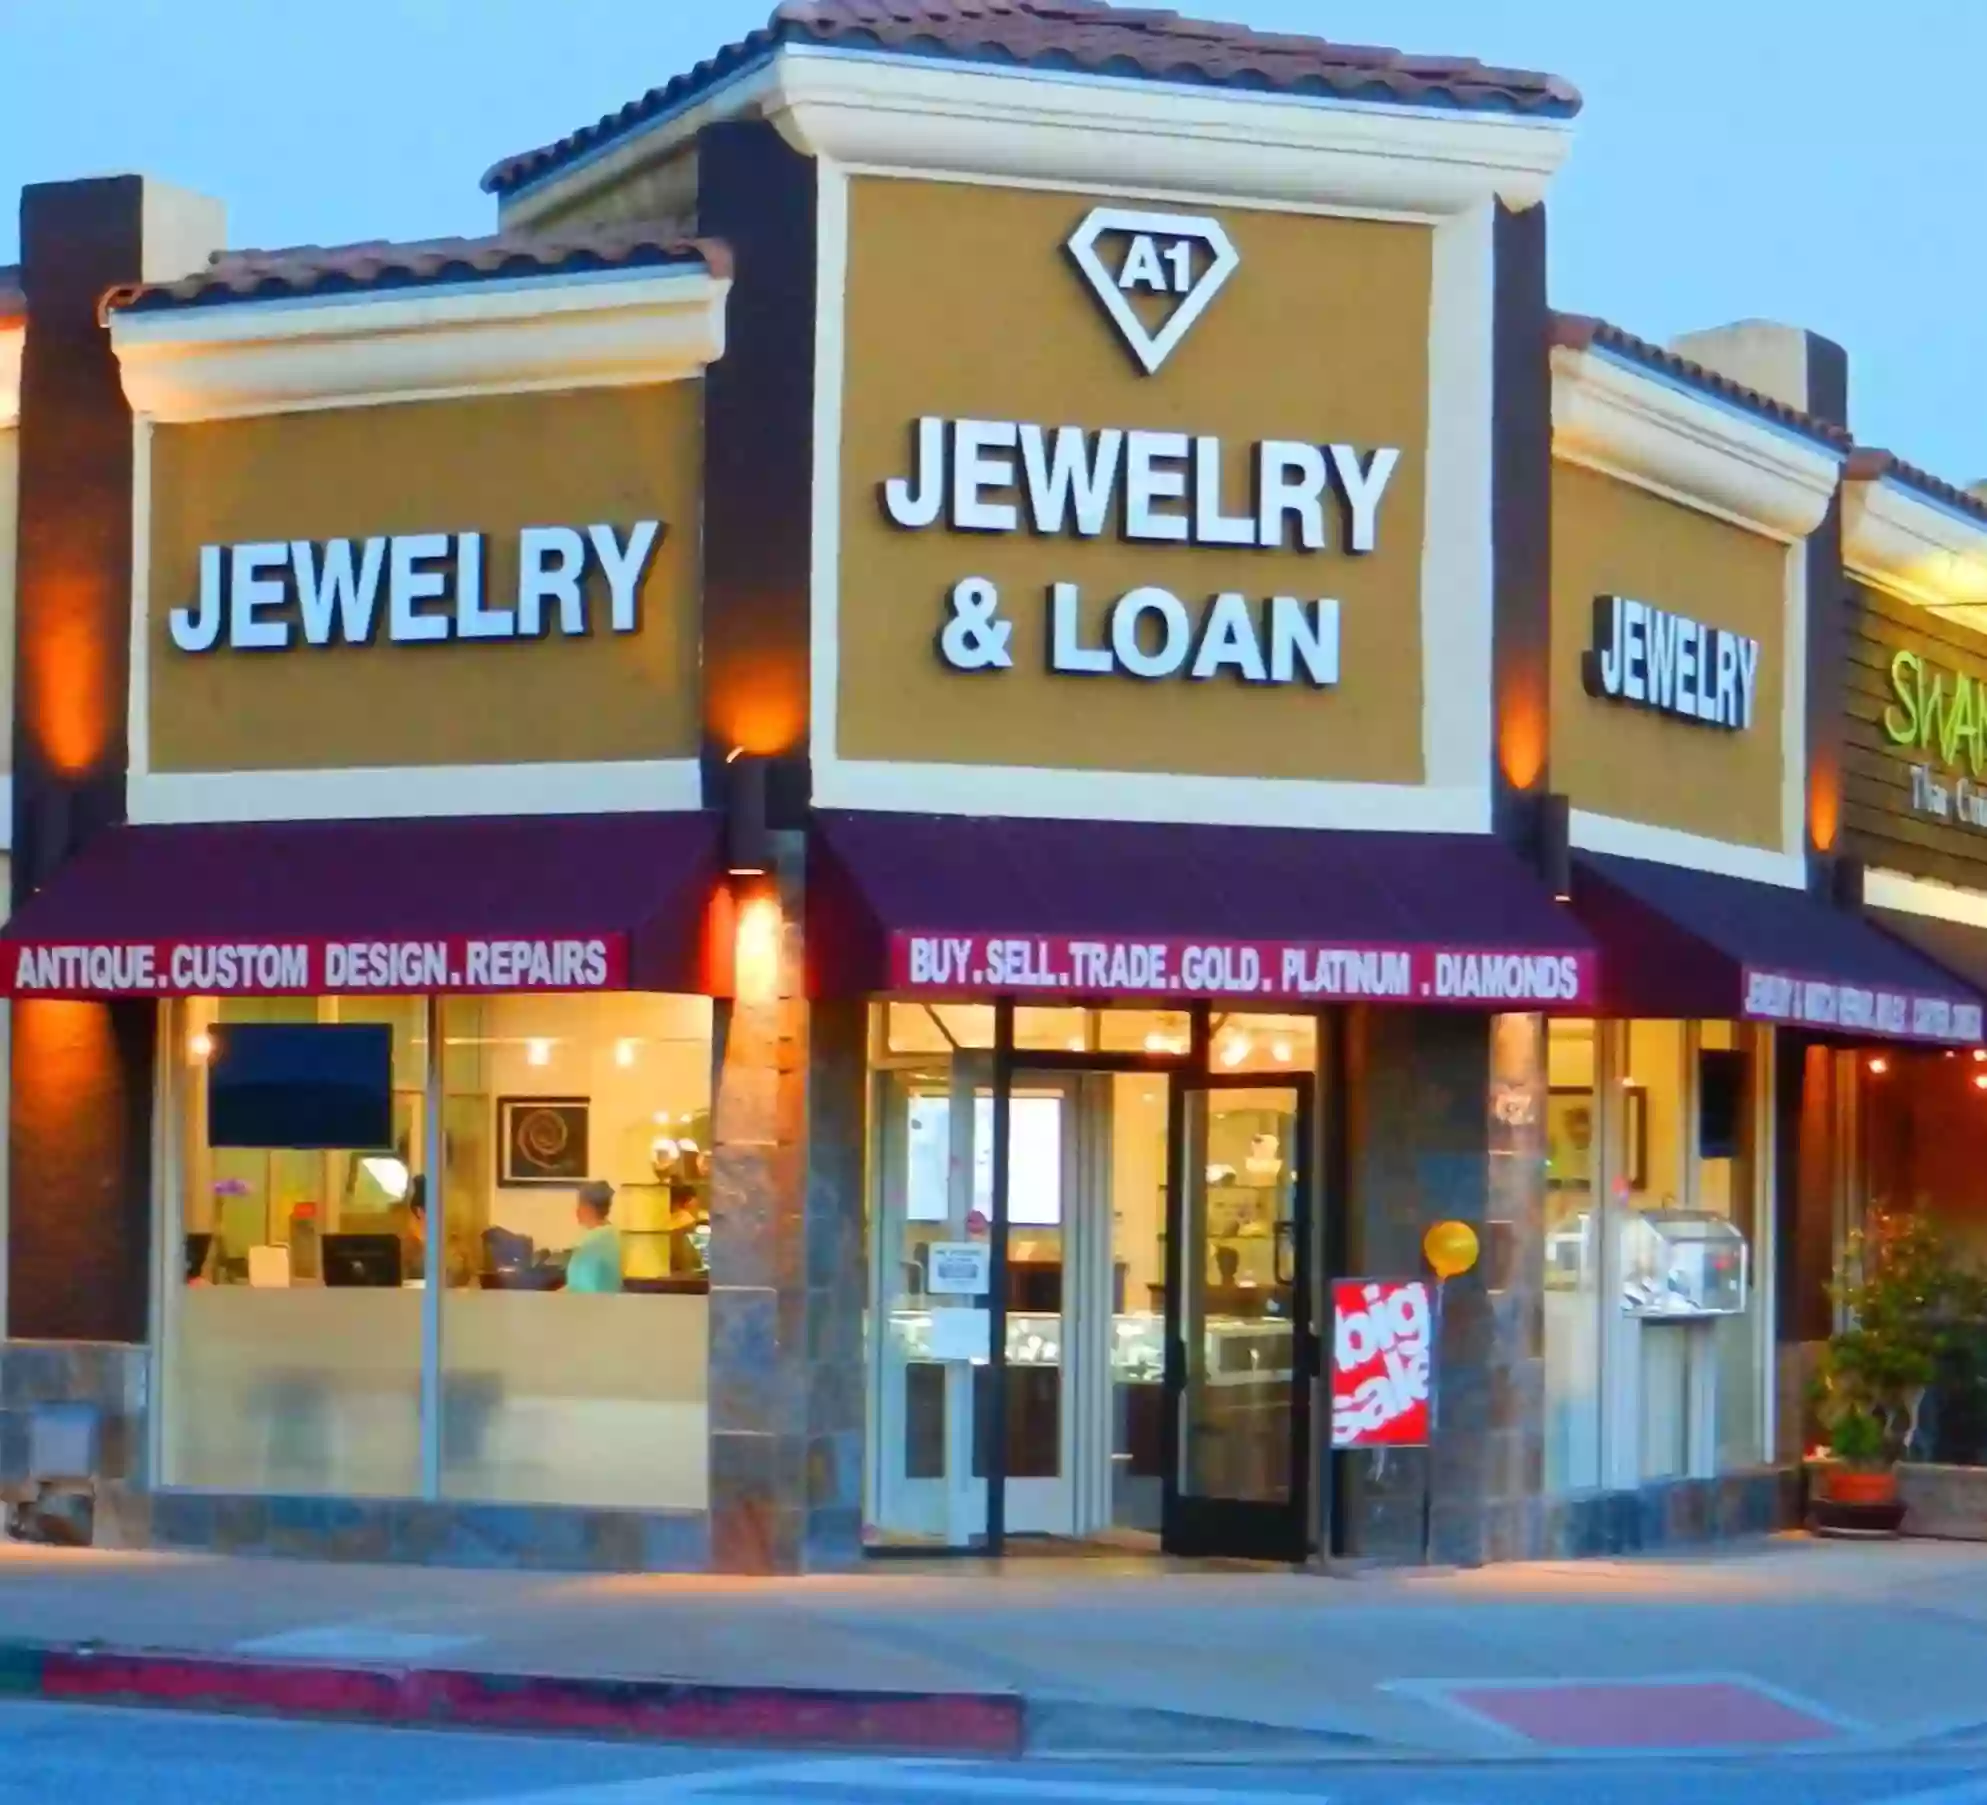 A1 Jewelry and loan